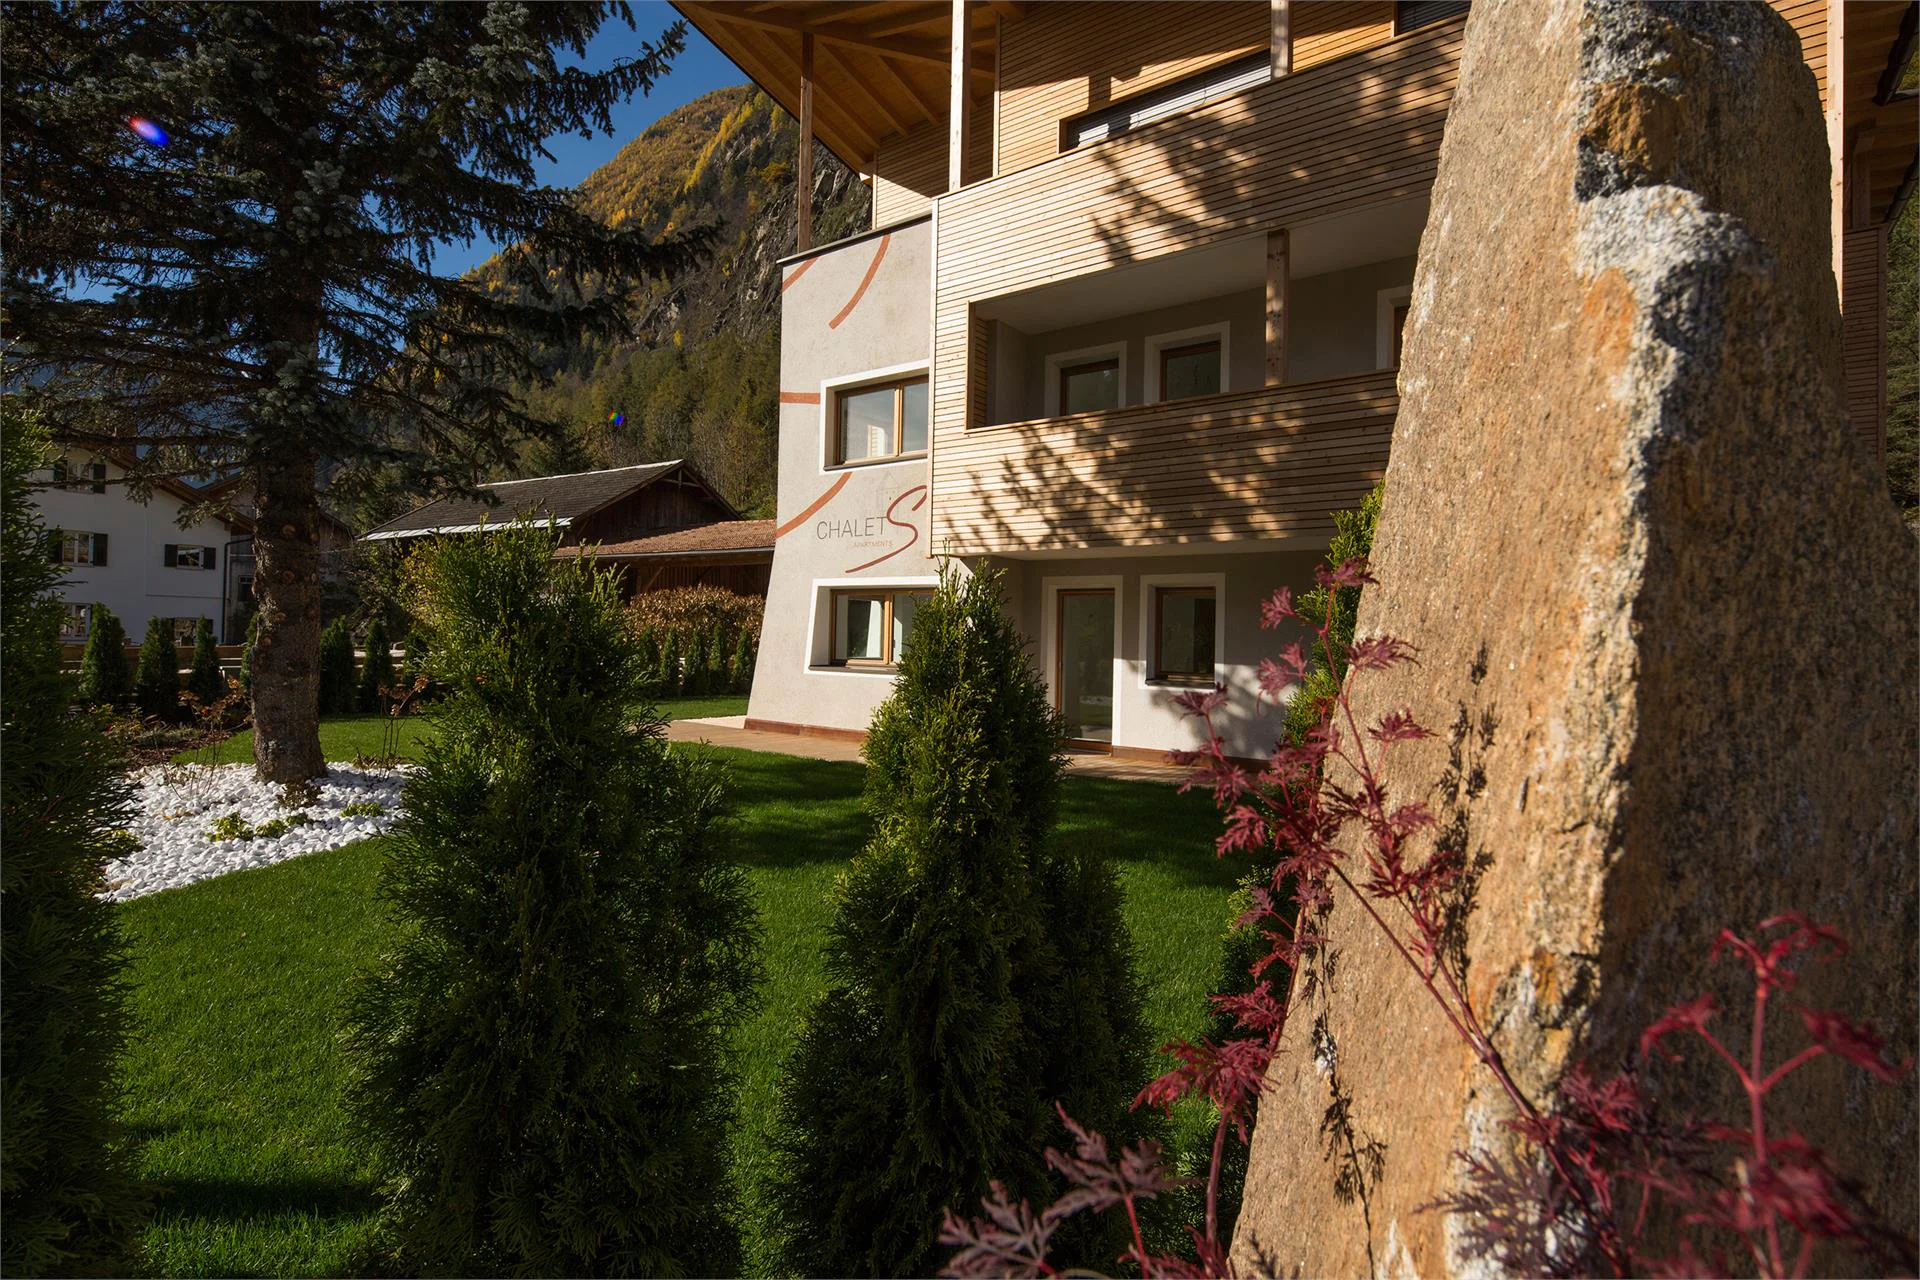 Chalet S Apartments Sand in Taufers/Campo Tures 6 suedtirol.info